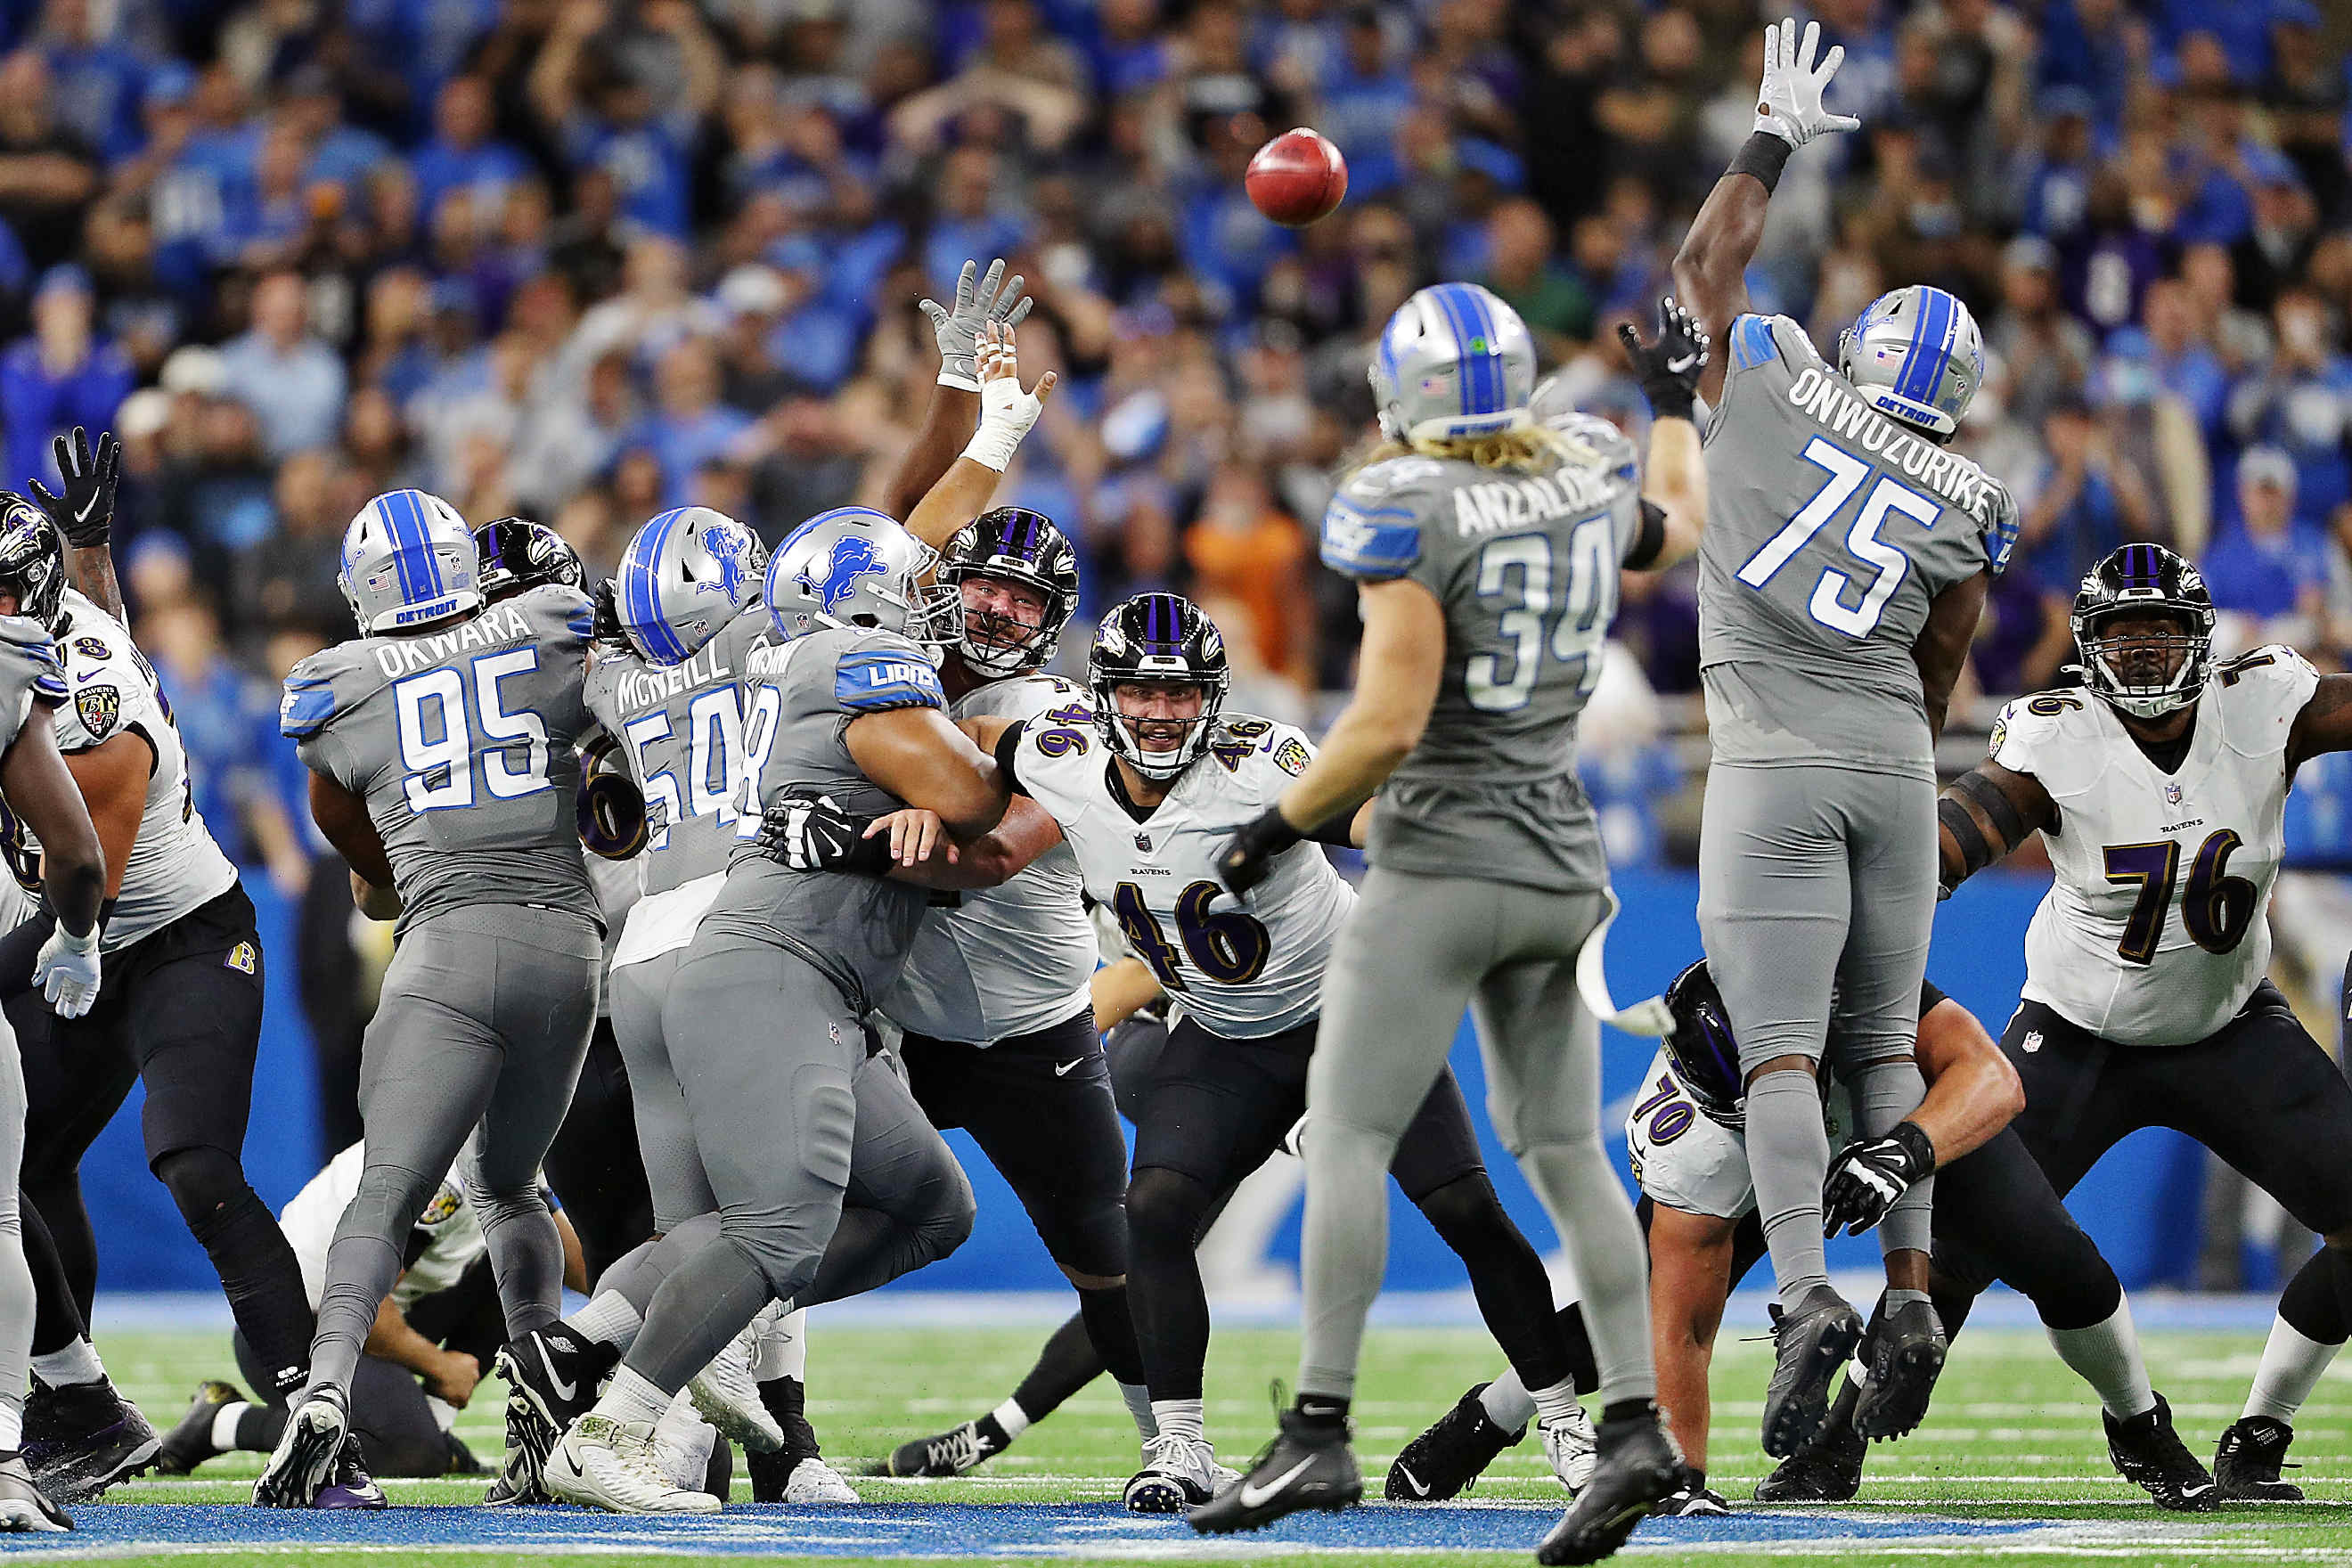 Lions vs. Ravens 2021: Game time, TV schedule, streaming live